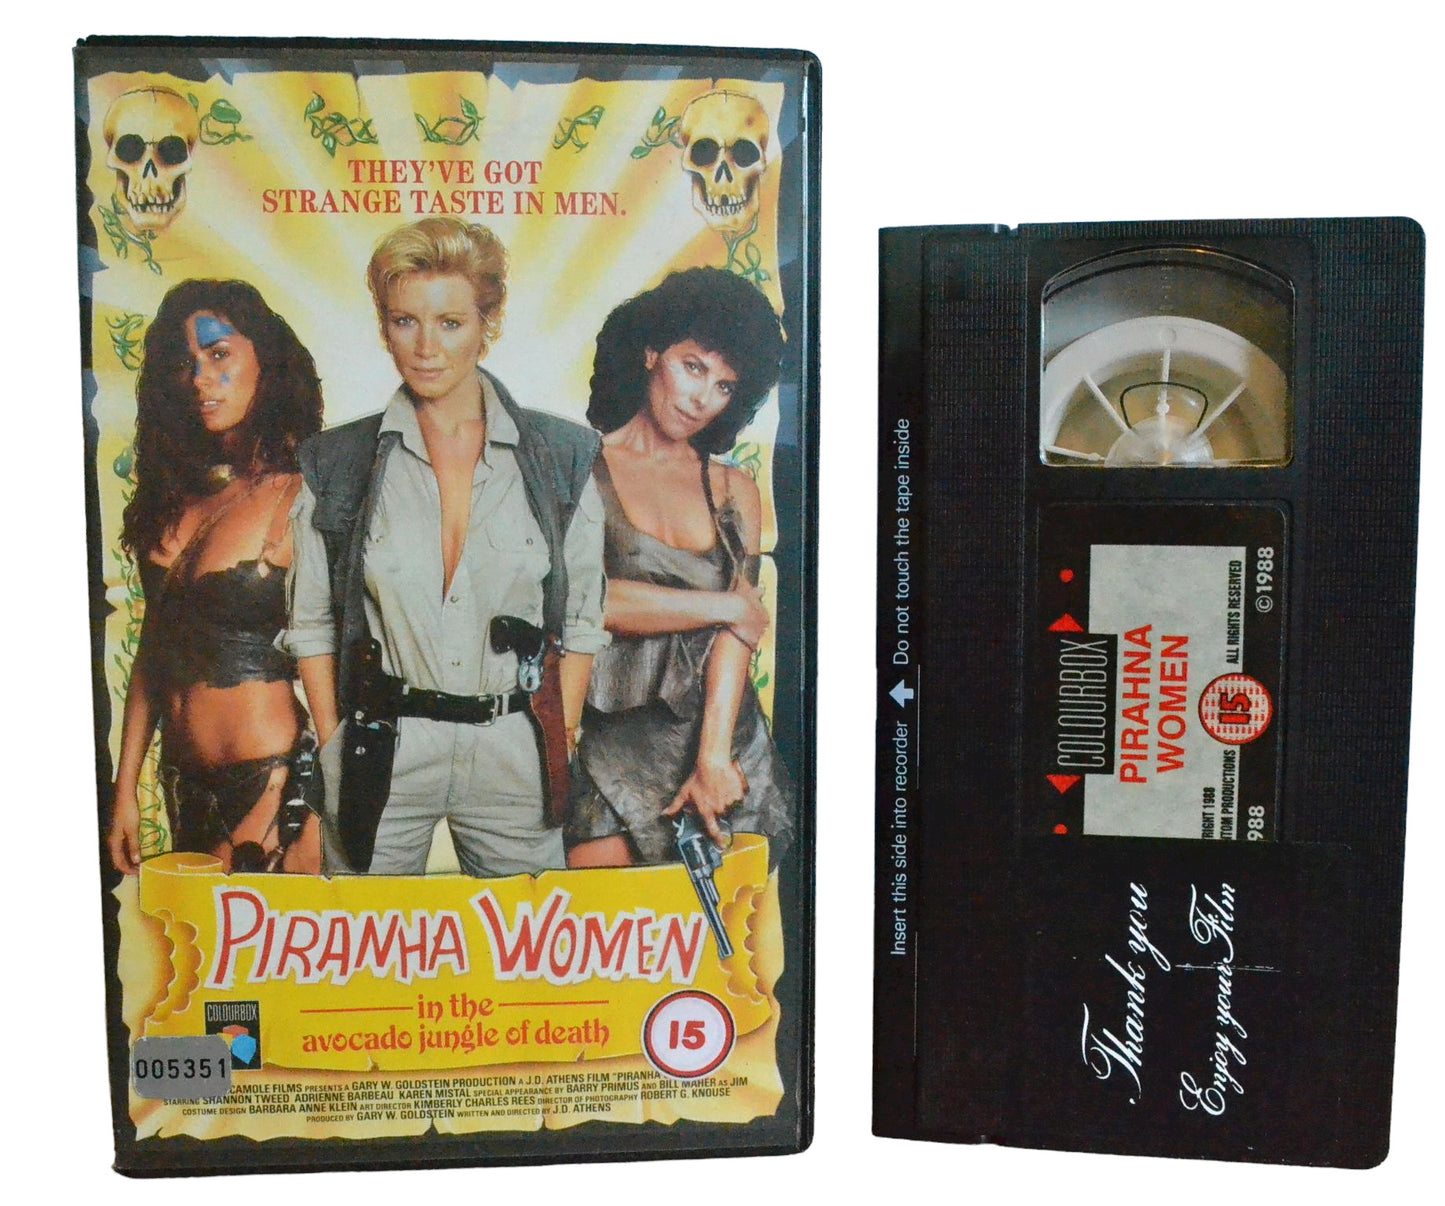 Piranha Women In He Avocado Jungle Of Death - Shannon Tweed - Colour Box - Action - Large Box - Pal VHS-